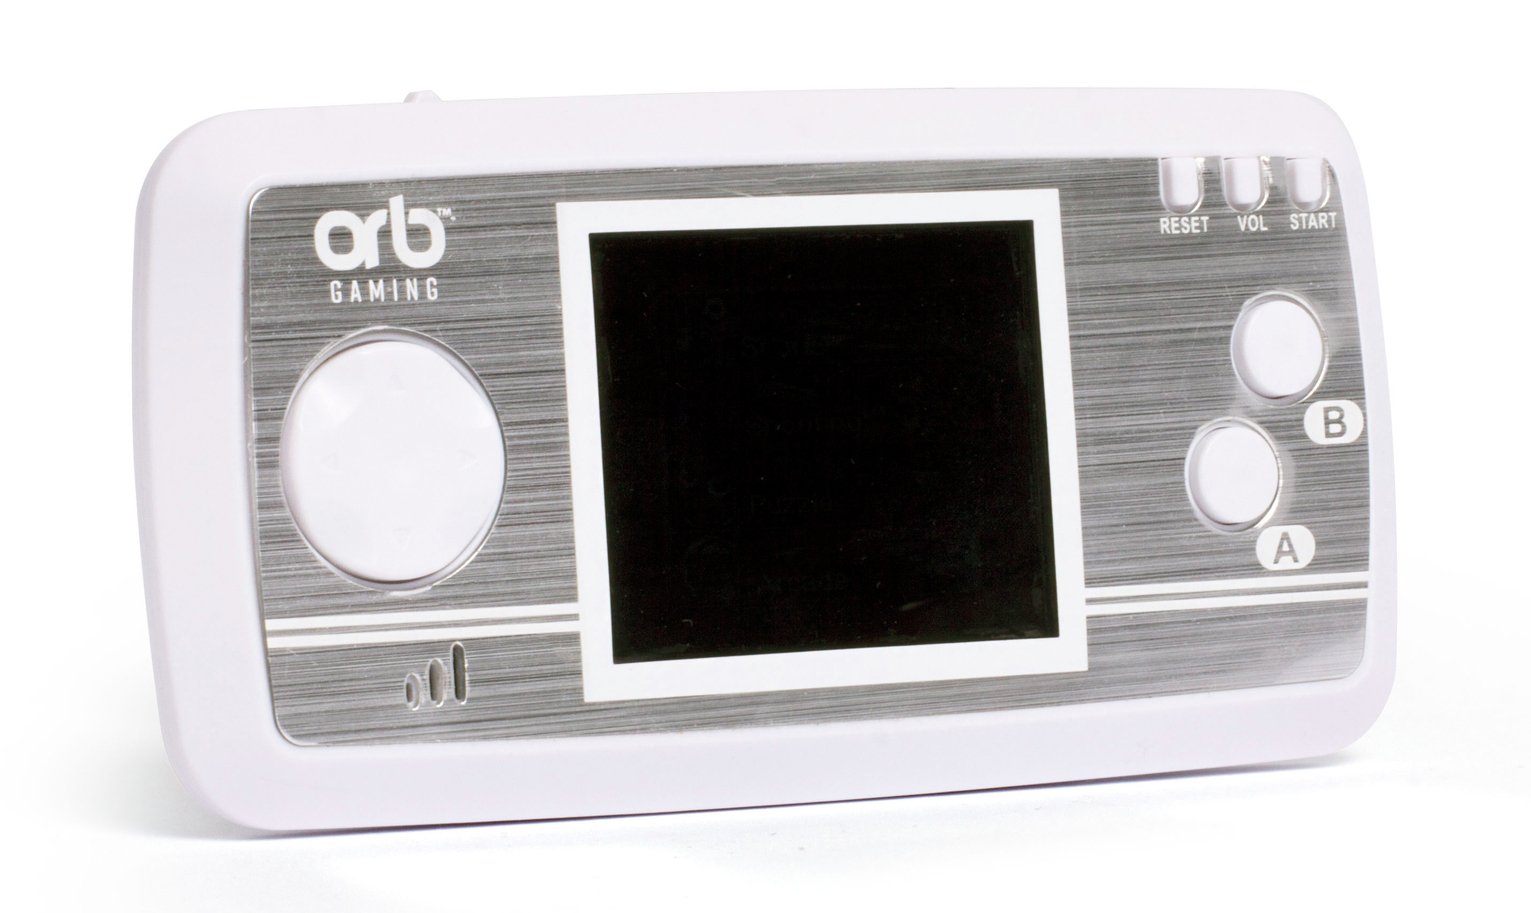 Retro Handheld Gaming Console with 200 Games Review